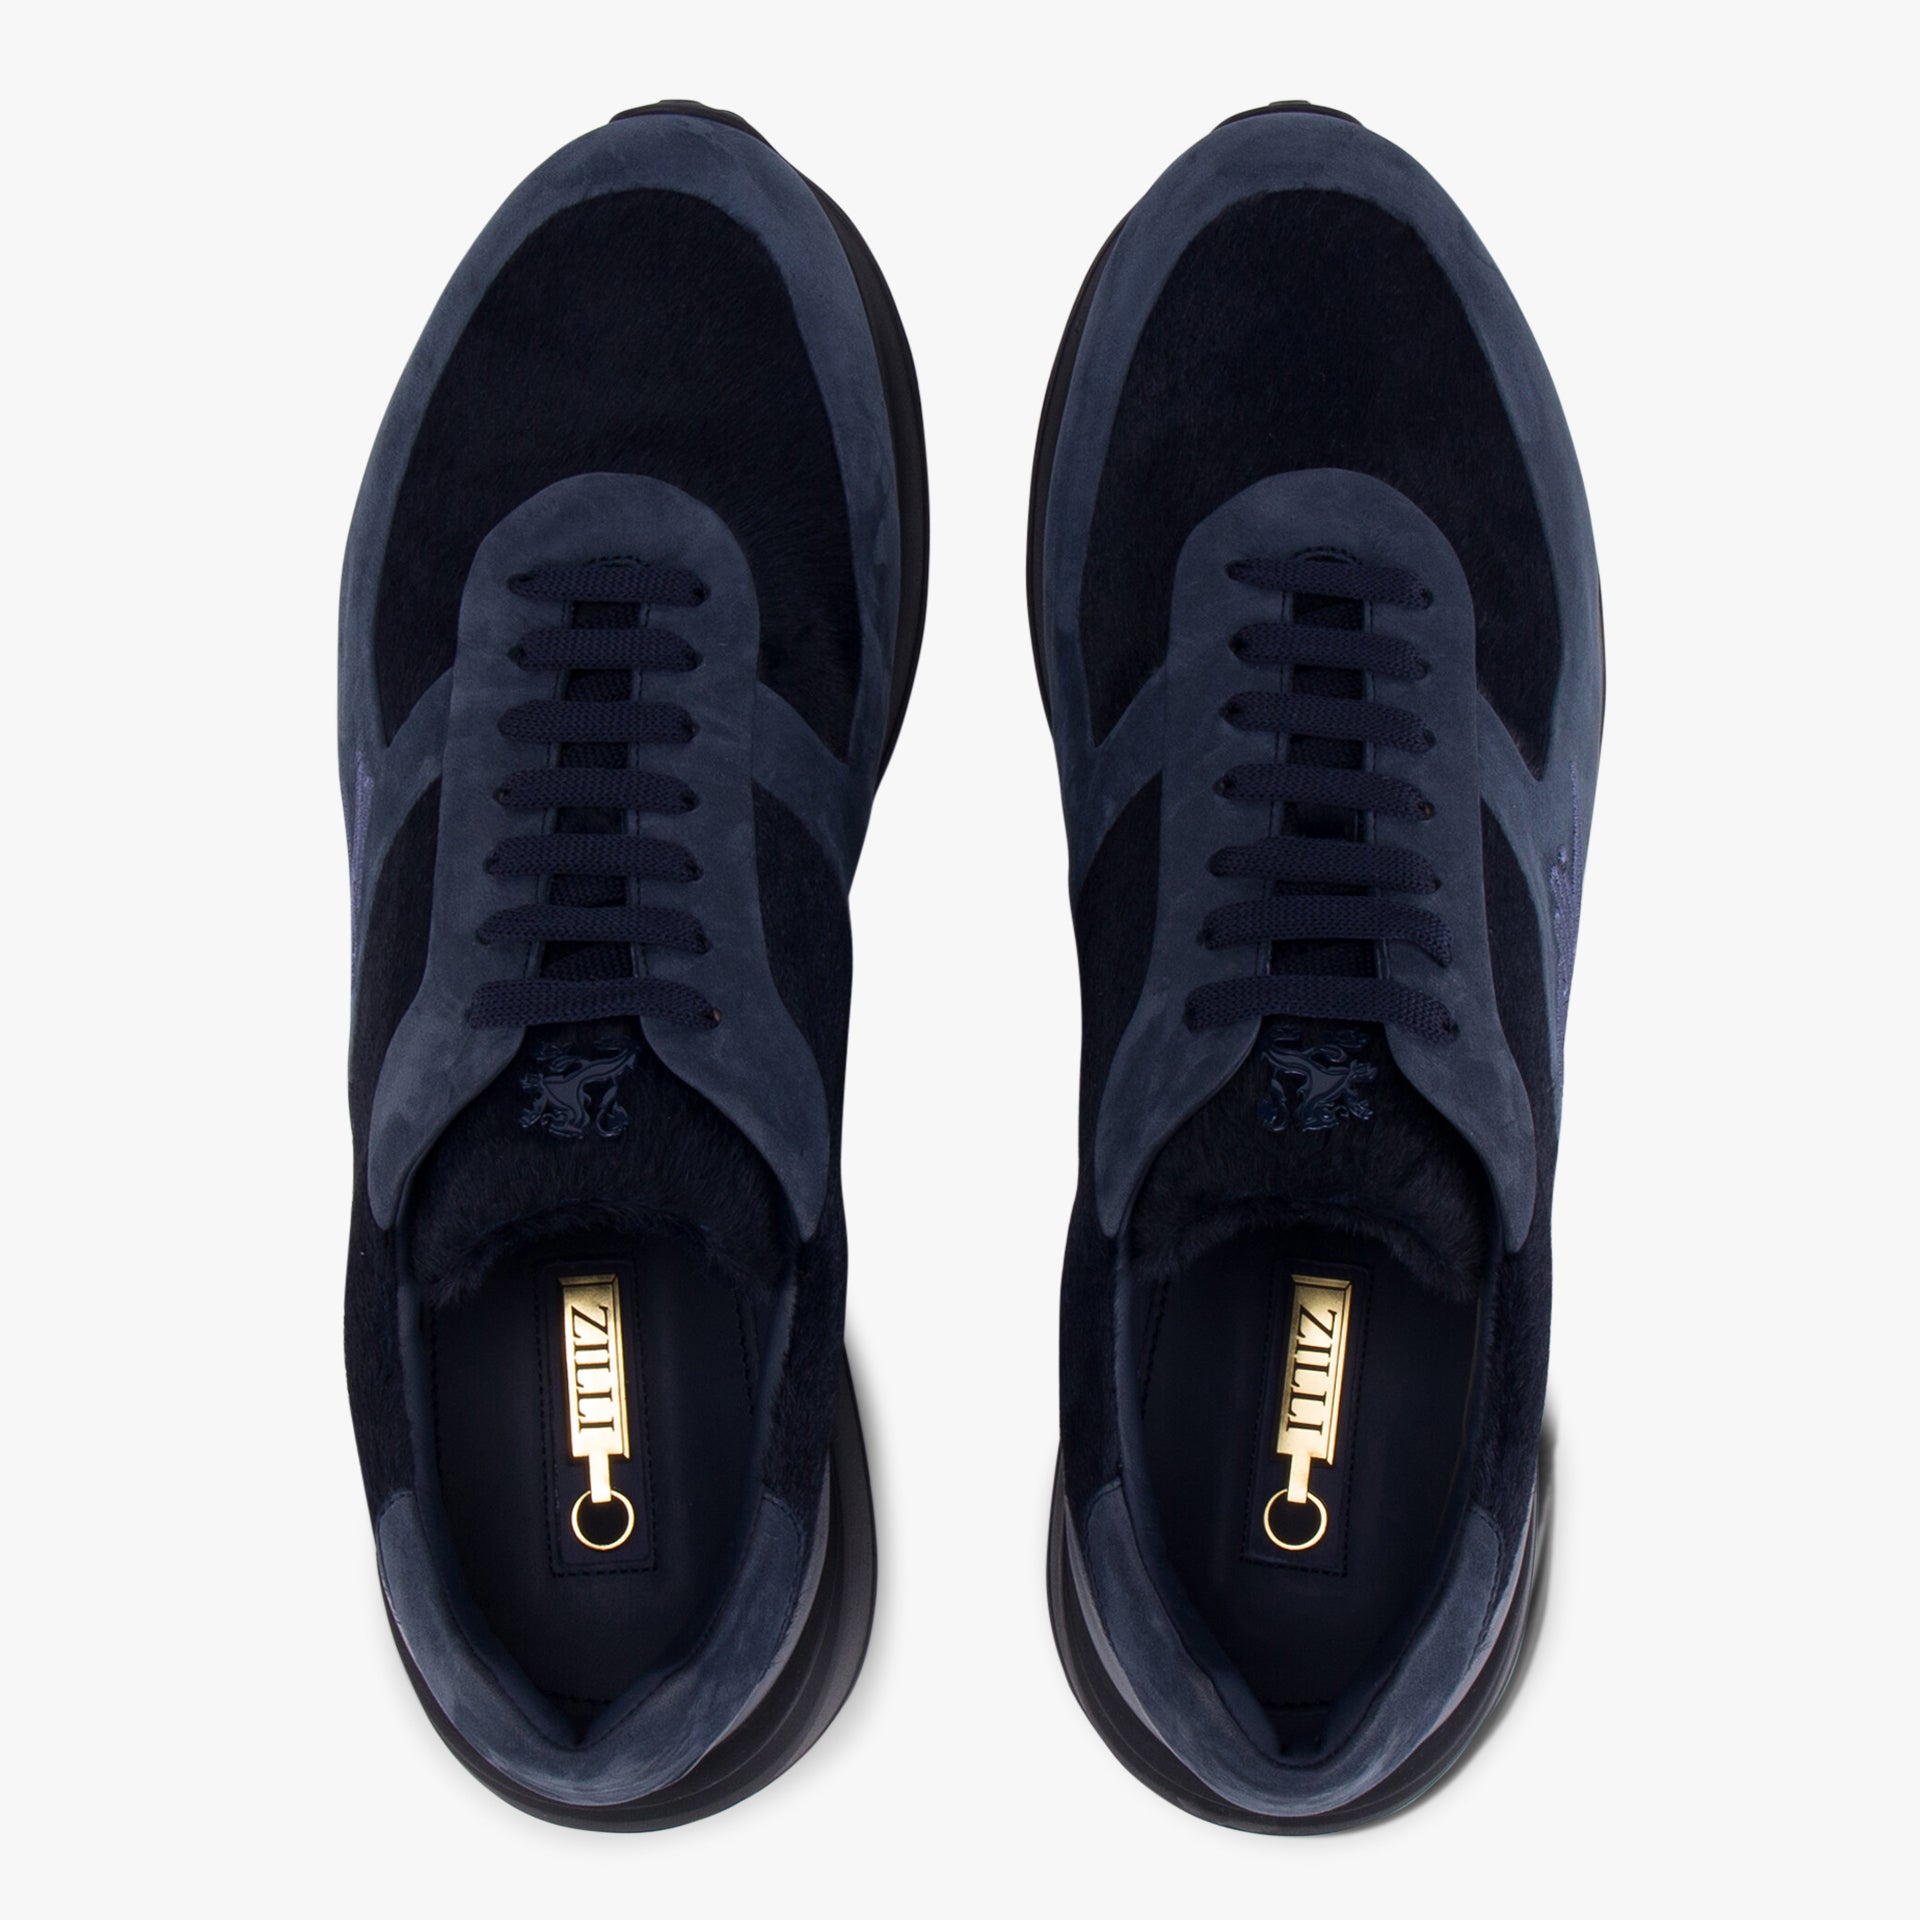 Suede Calfskin Sneakers with ZILLI Signature